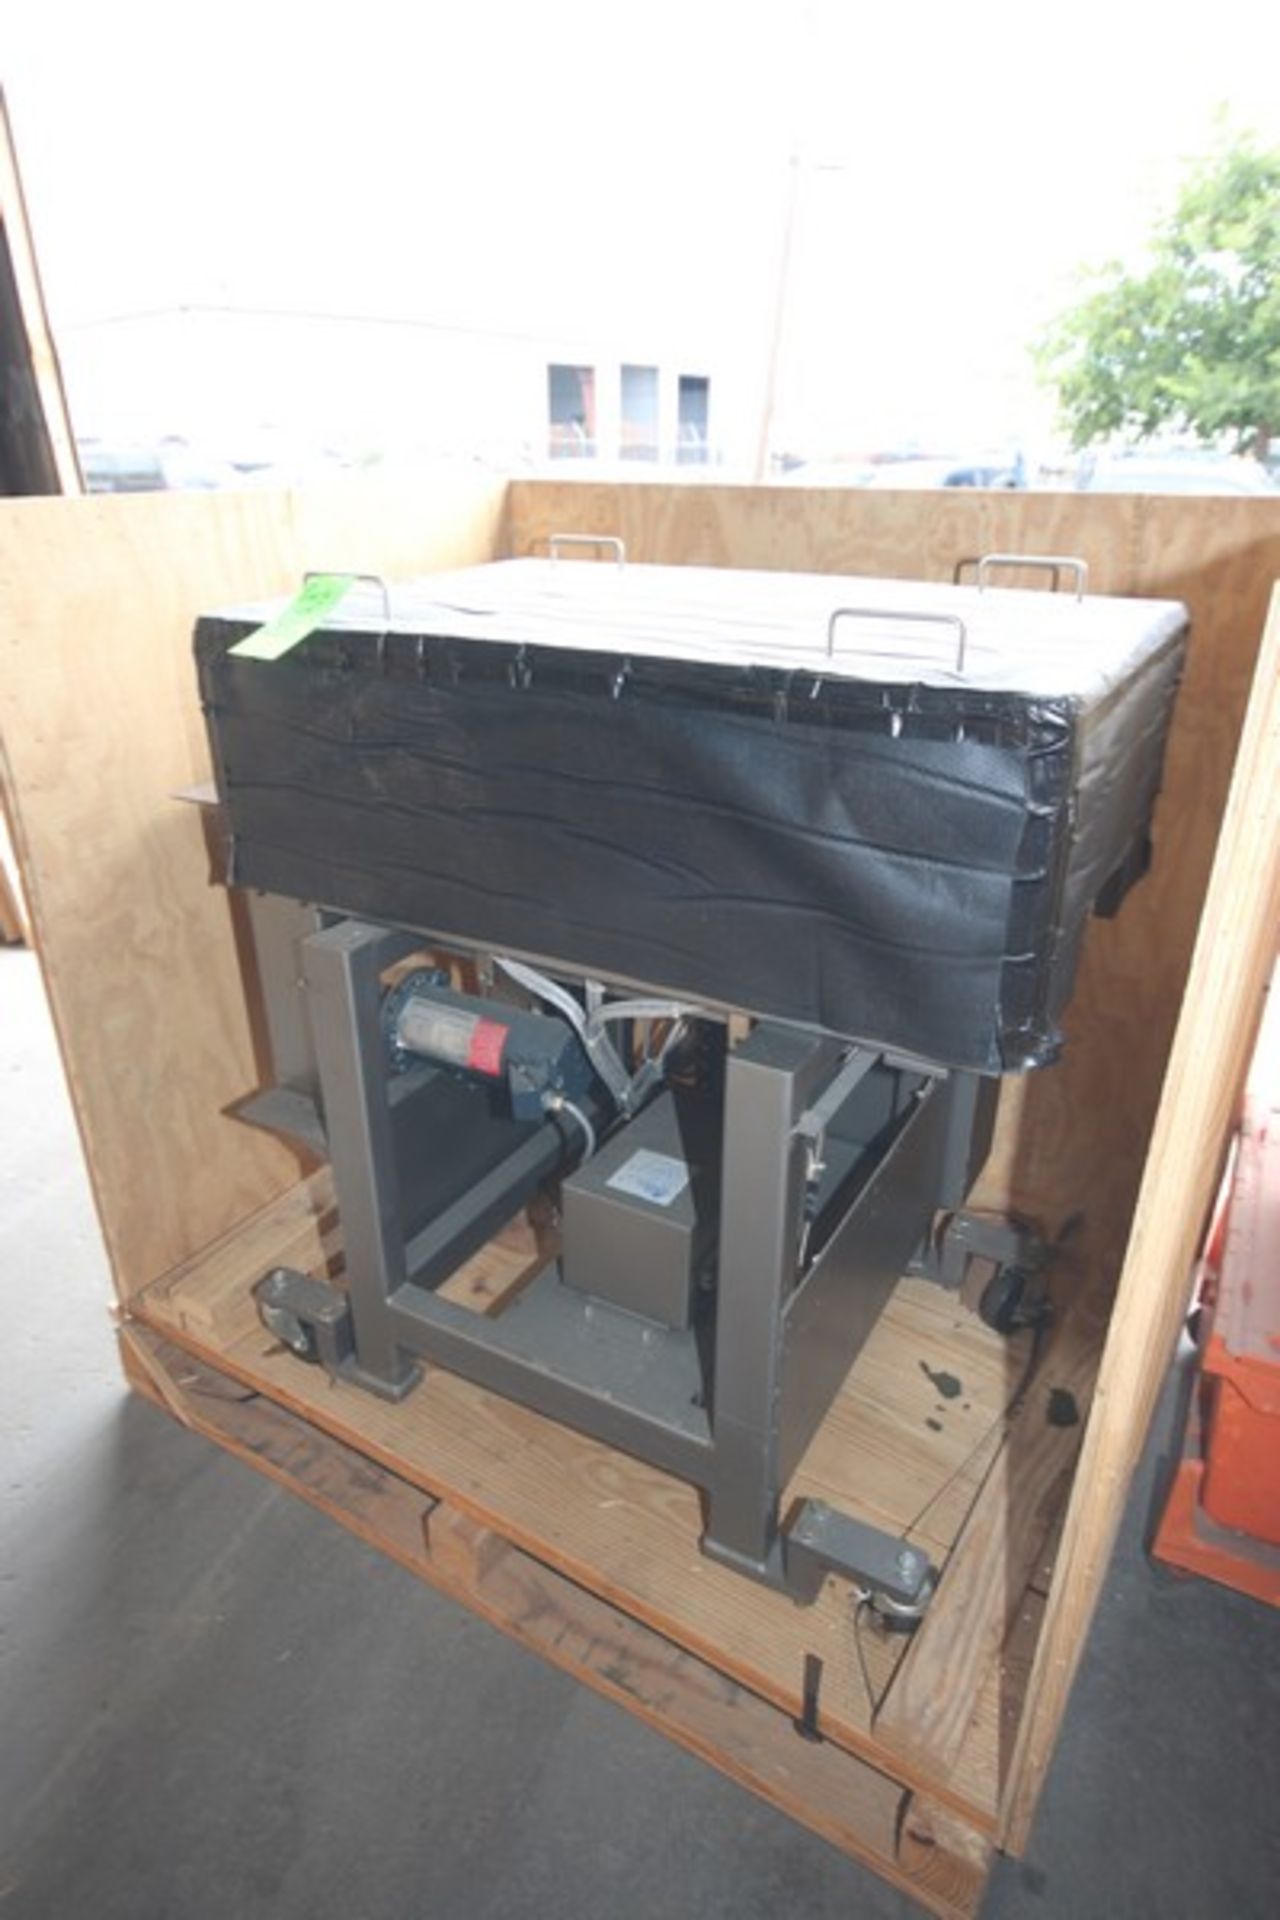 Scandia Packaging Machine, M/N 609, S/N 1-6721, with Touchscreens Display, with Allen Bradley PLC, - Image 7 of 9